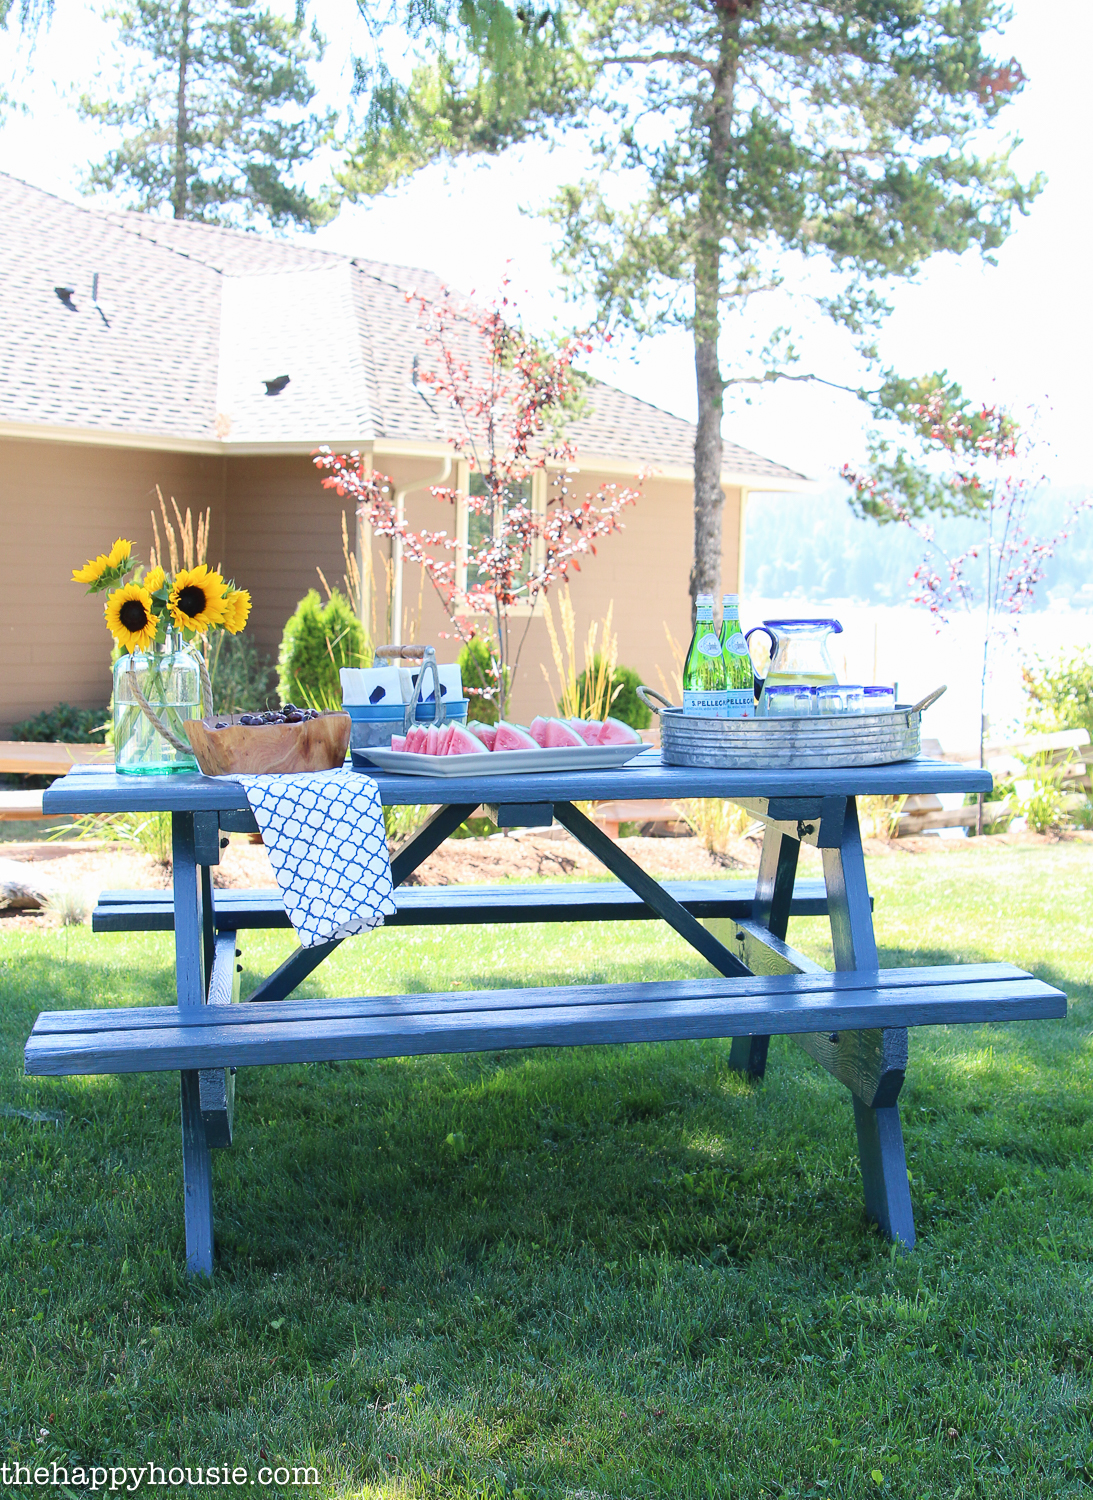 The painted picnic table with food on top of it.